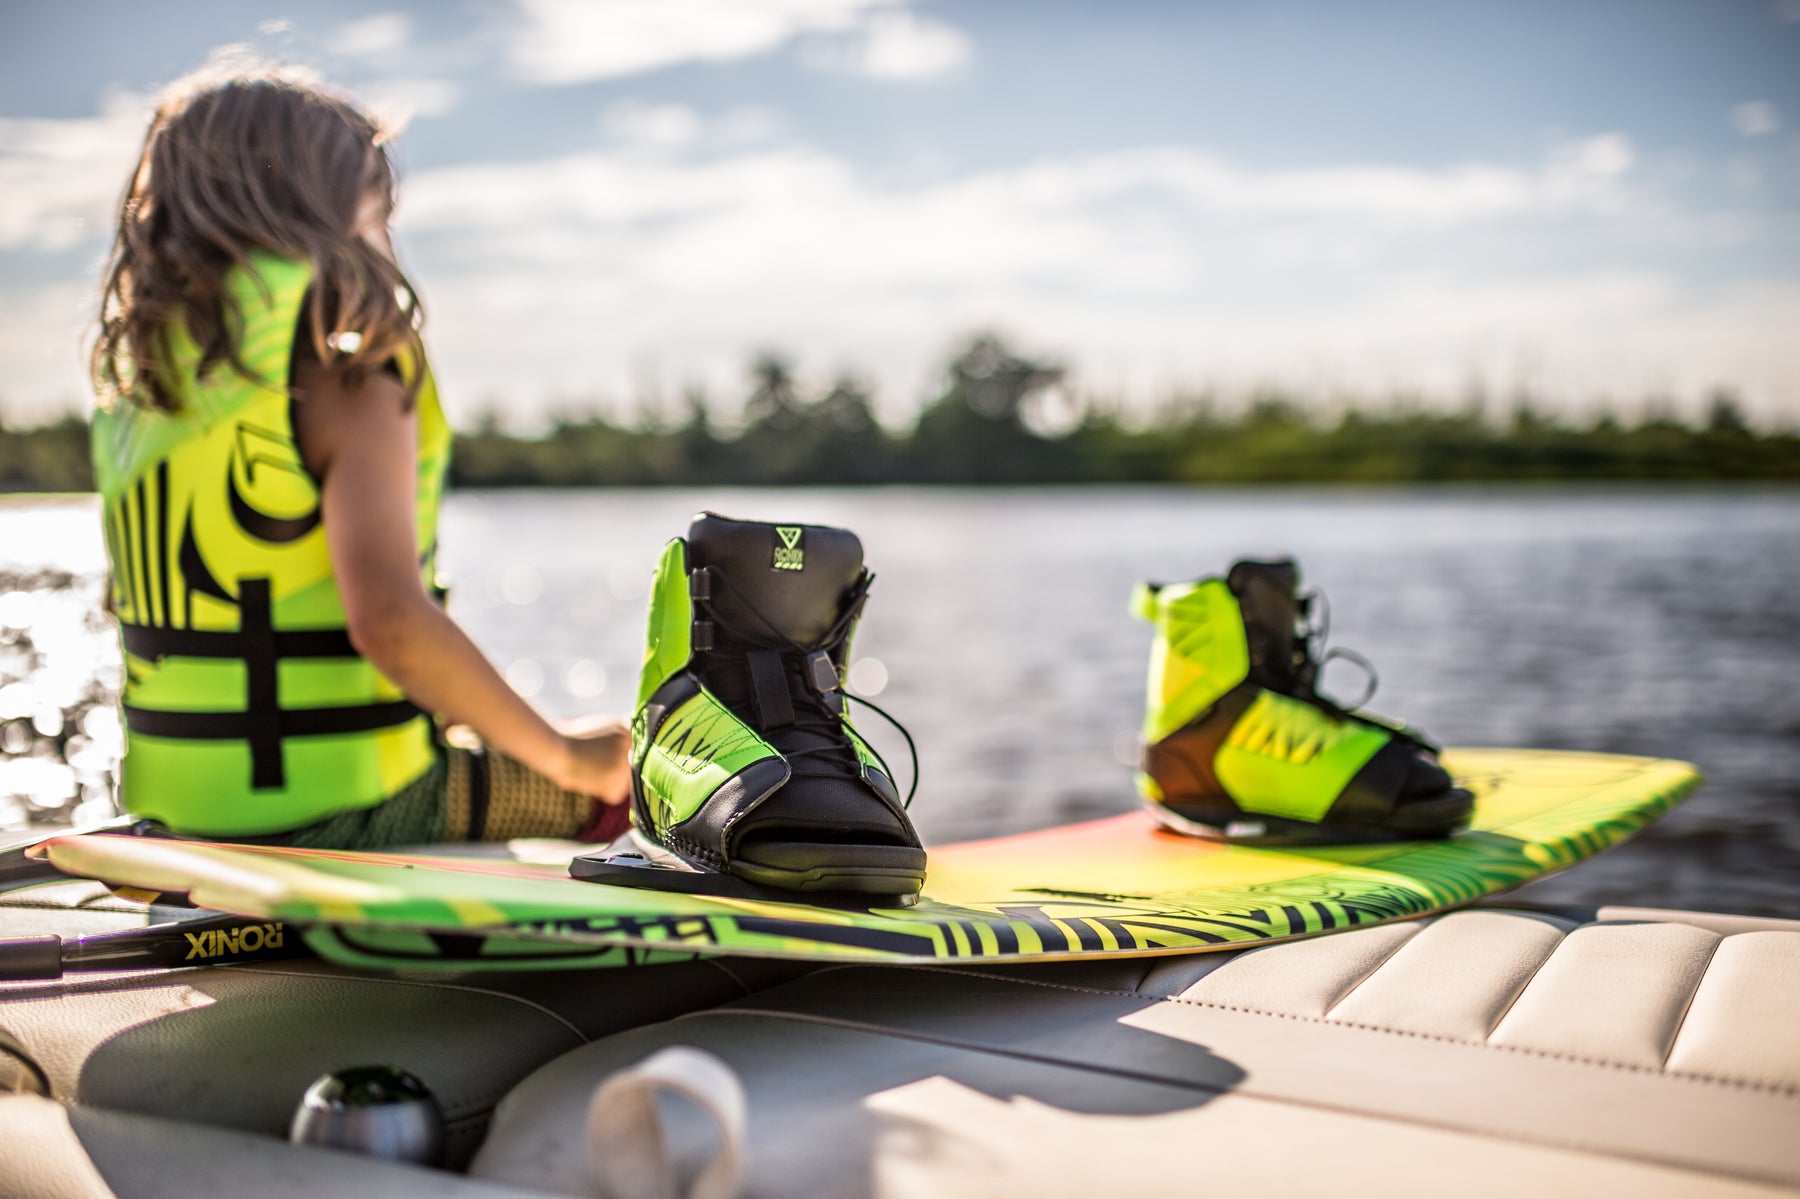 What gear do you need to start wakeboarding - 88 Gear 